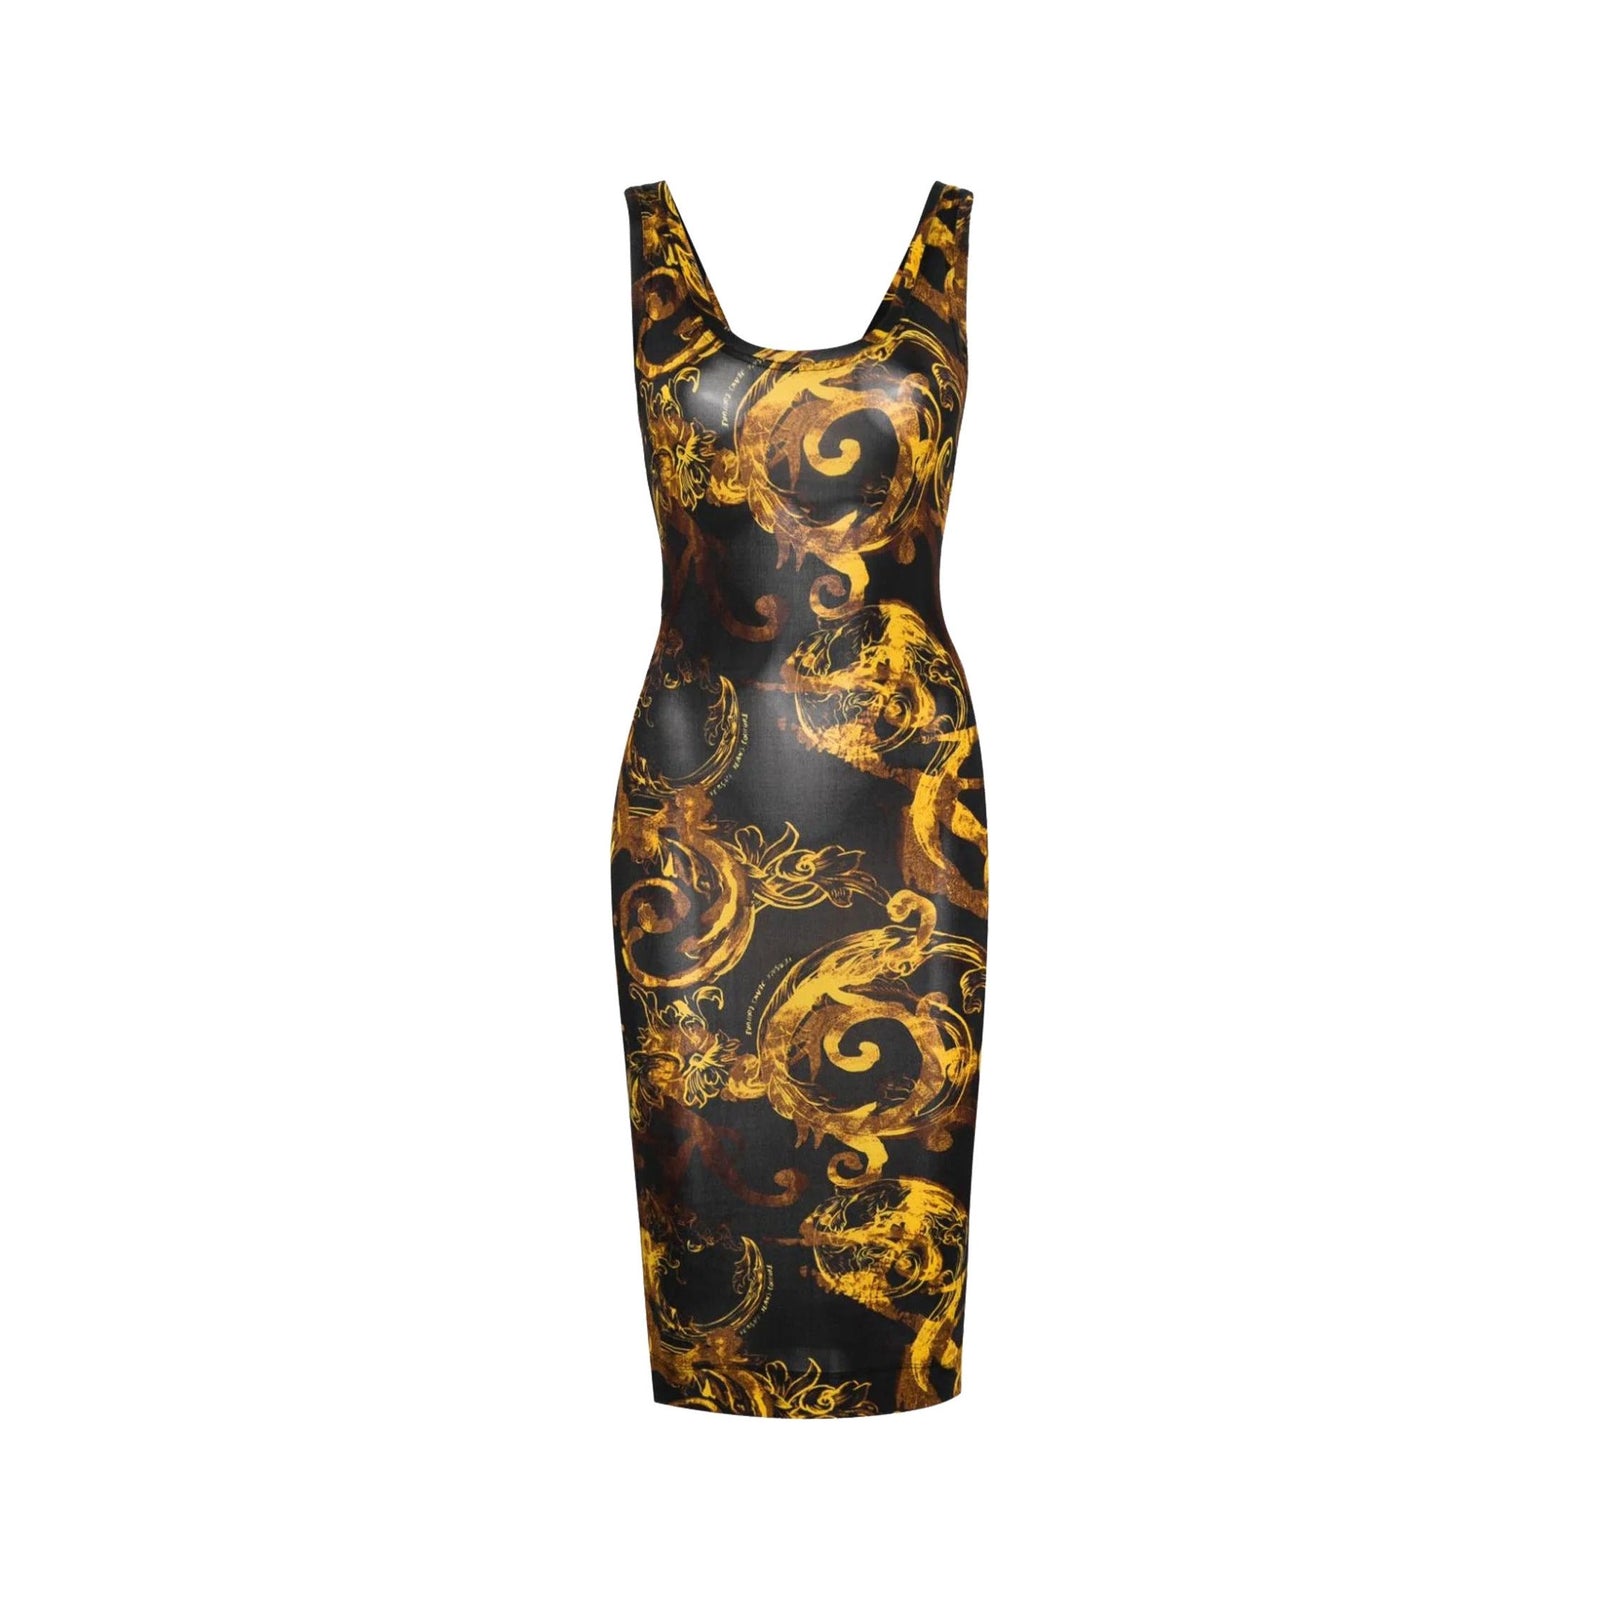 VERSACE JEANS COUTURE DRESS - Yooto